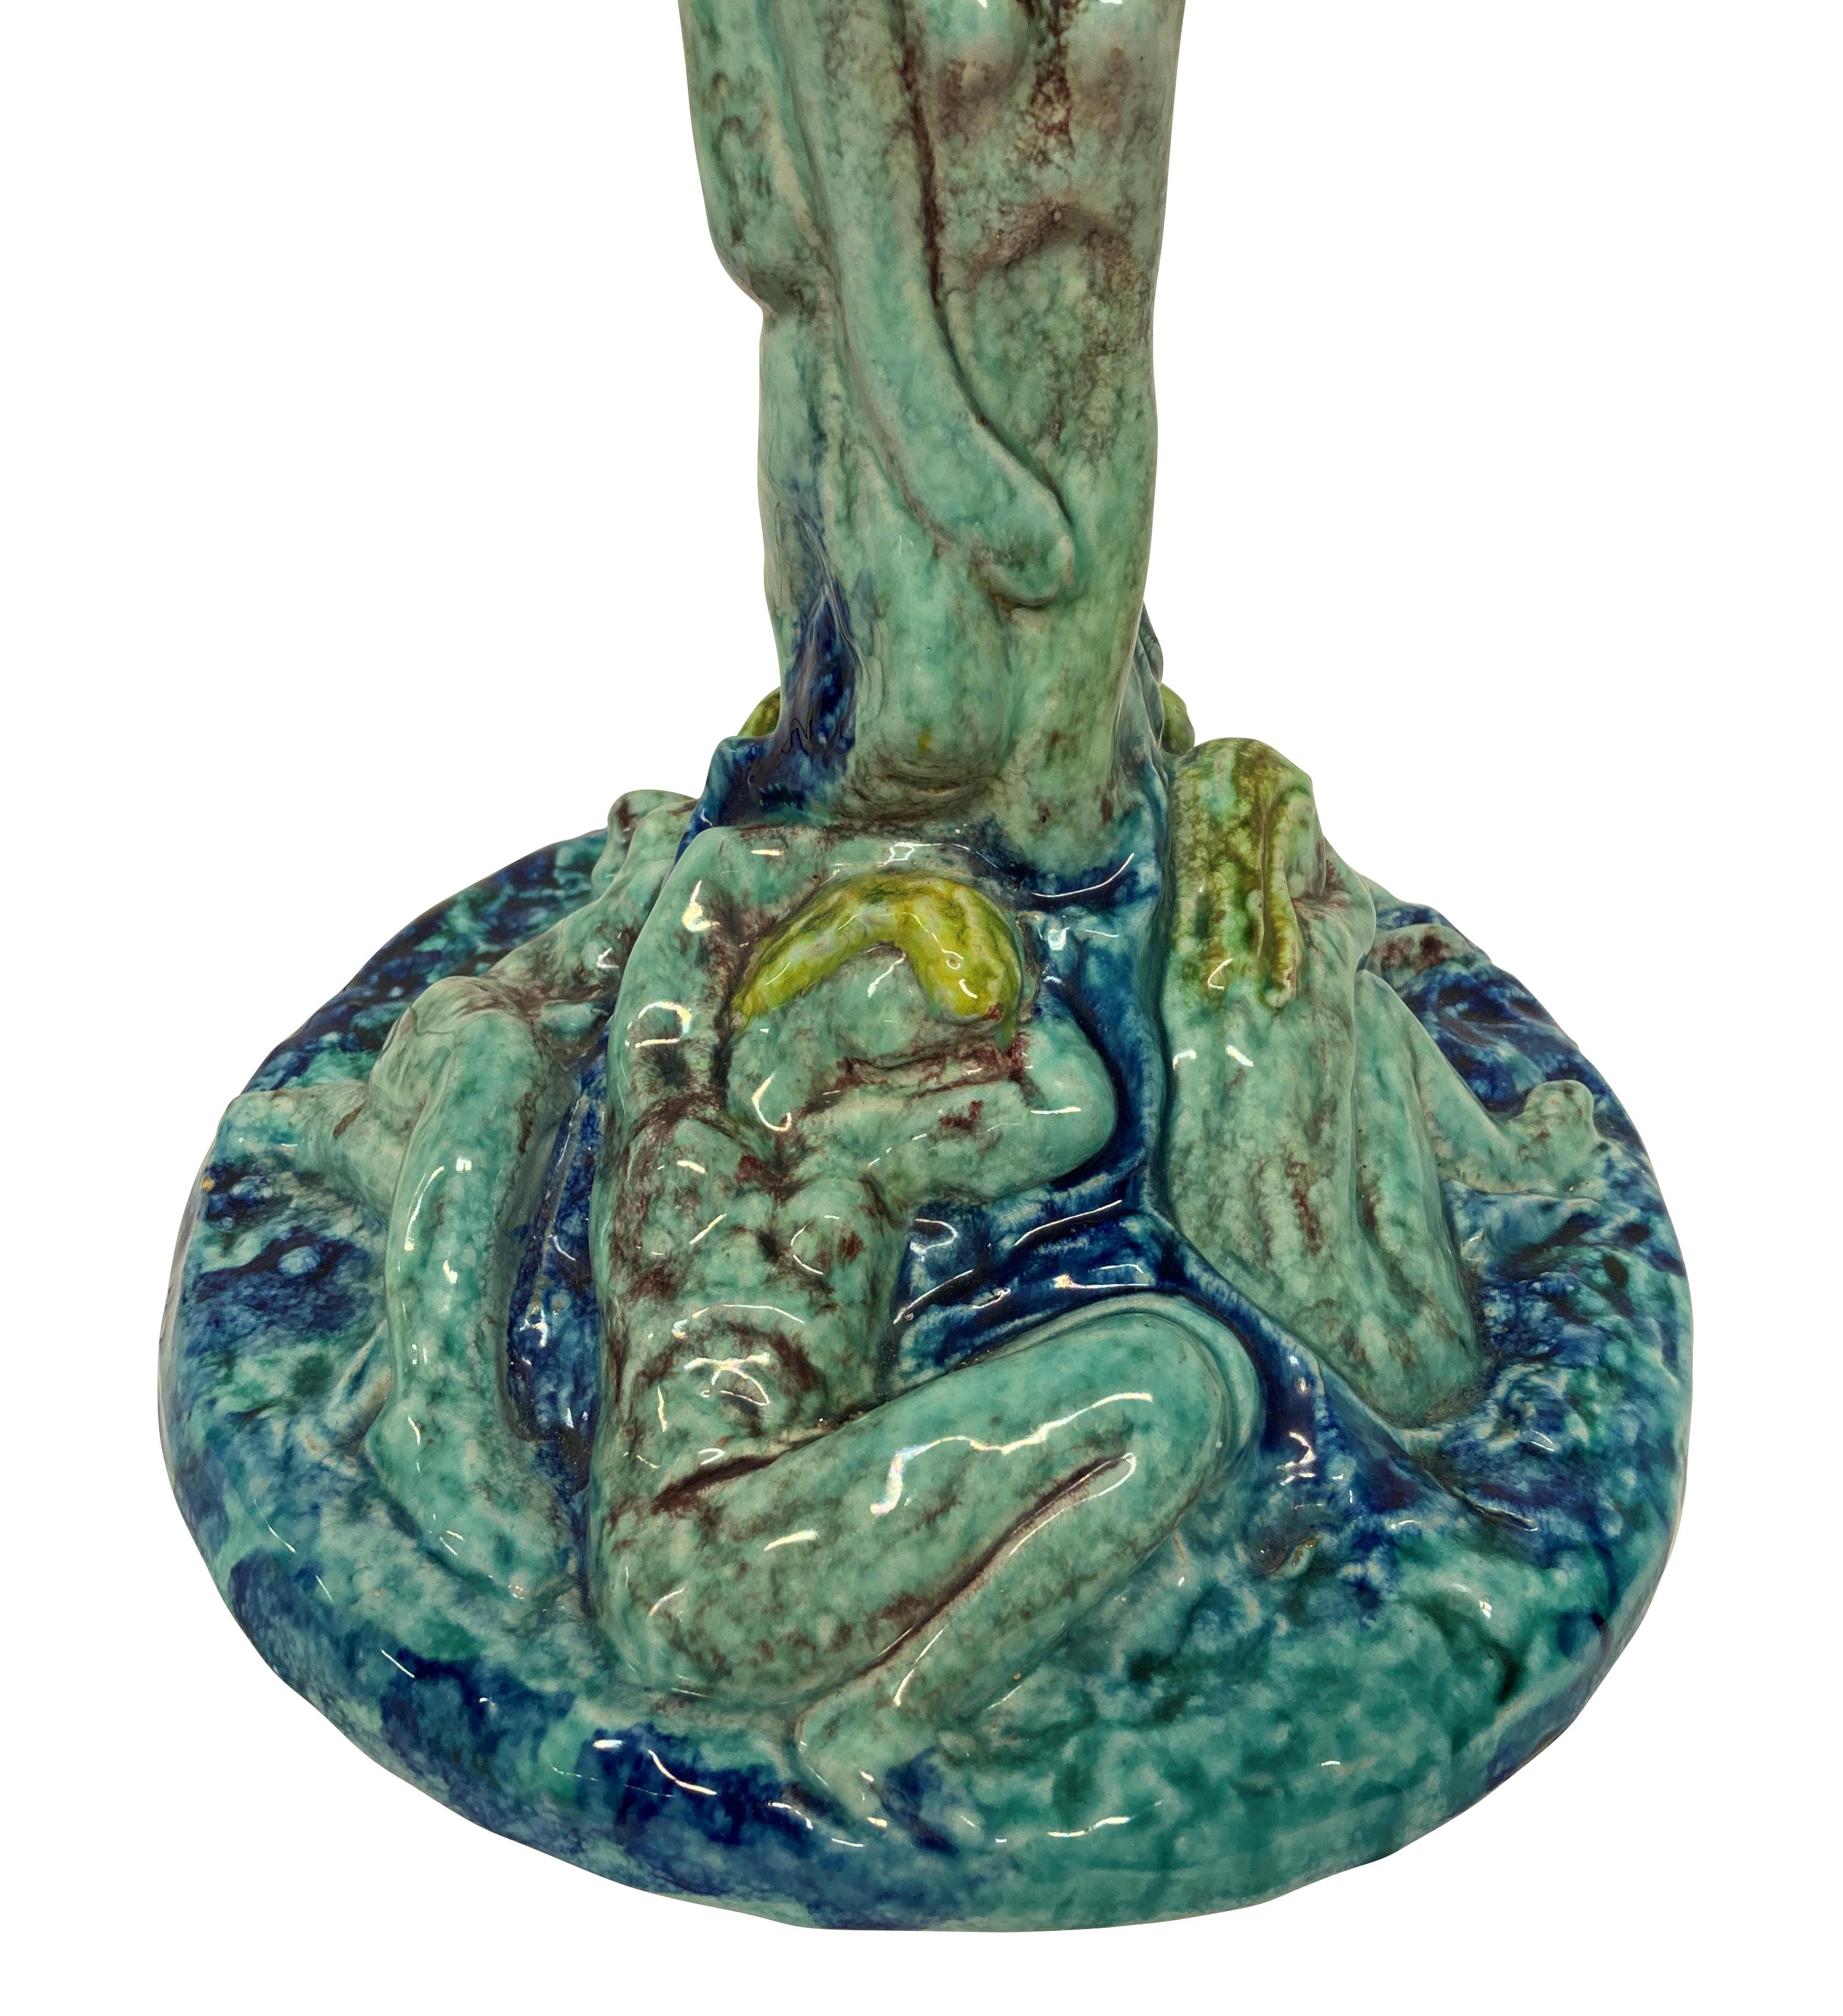 An Italian glazed ceramic floor lamp by Albisola, in the surrealist manner depicting nude female figures throughout.